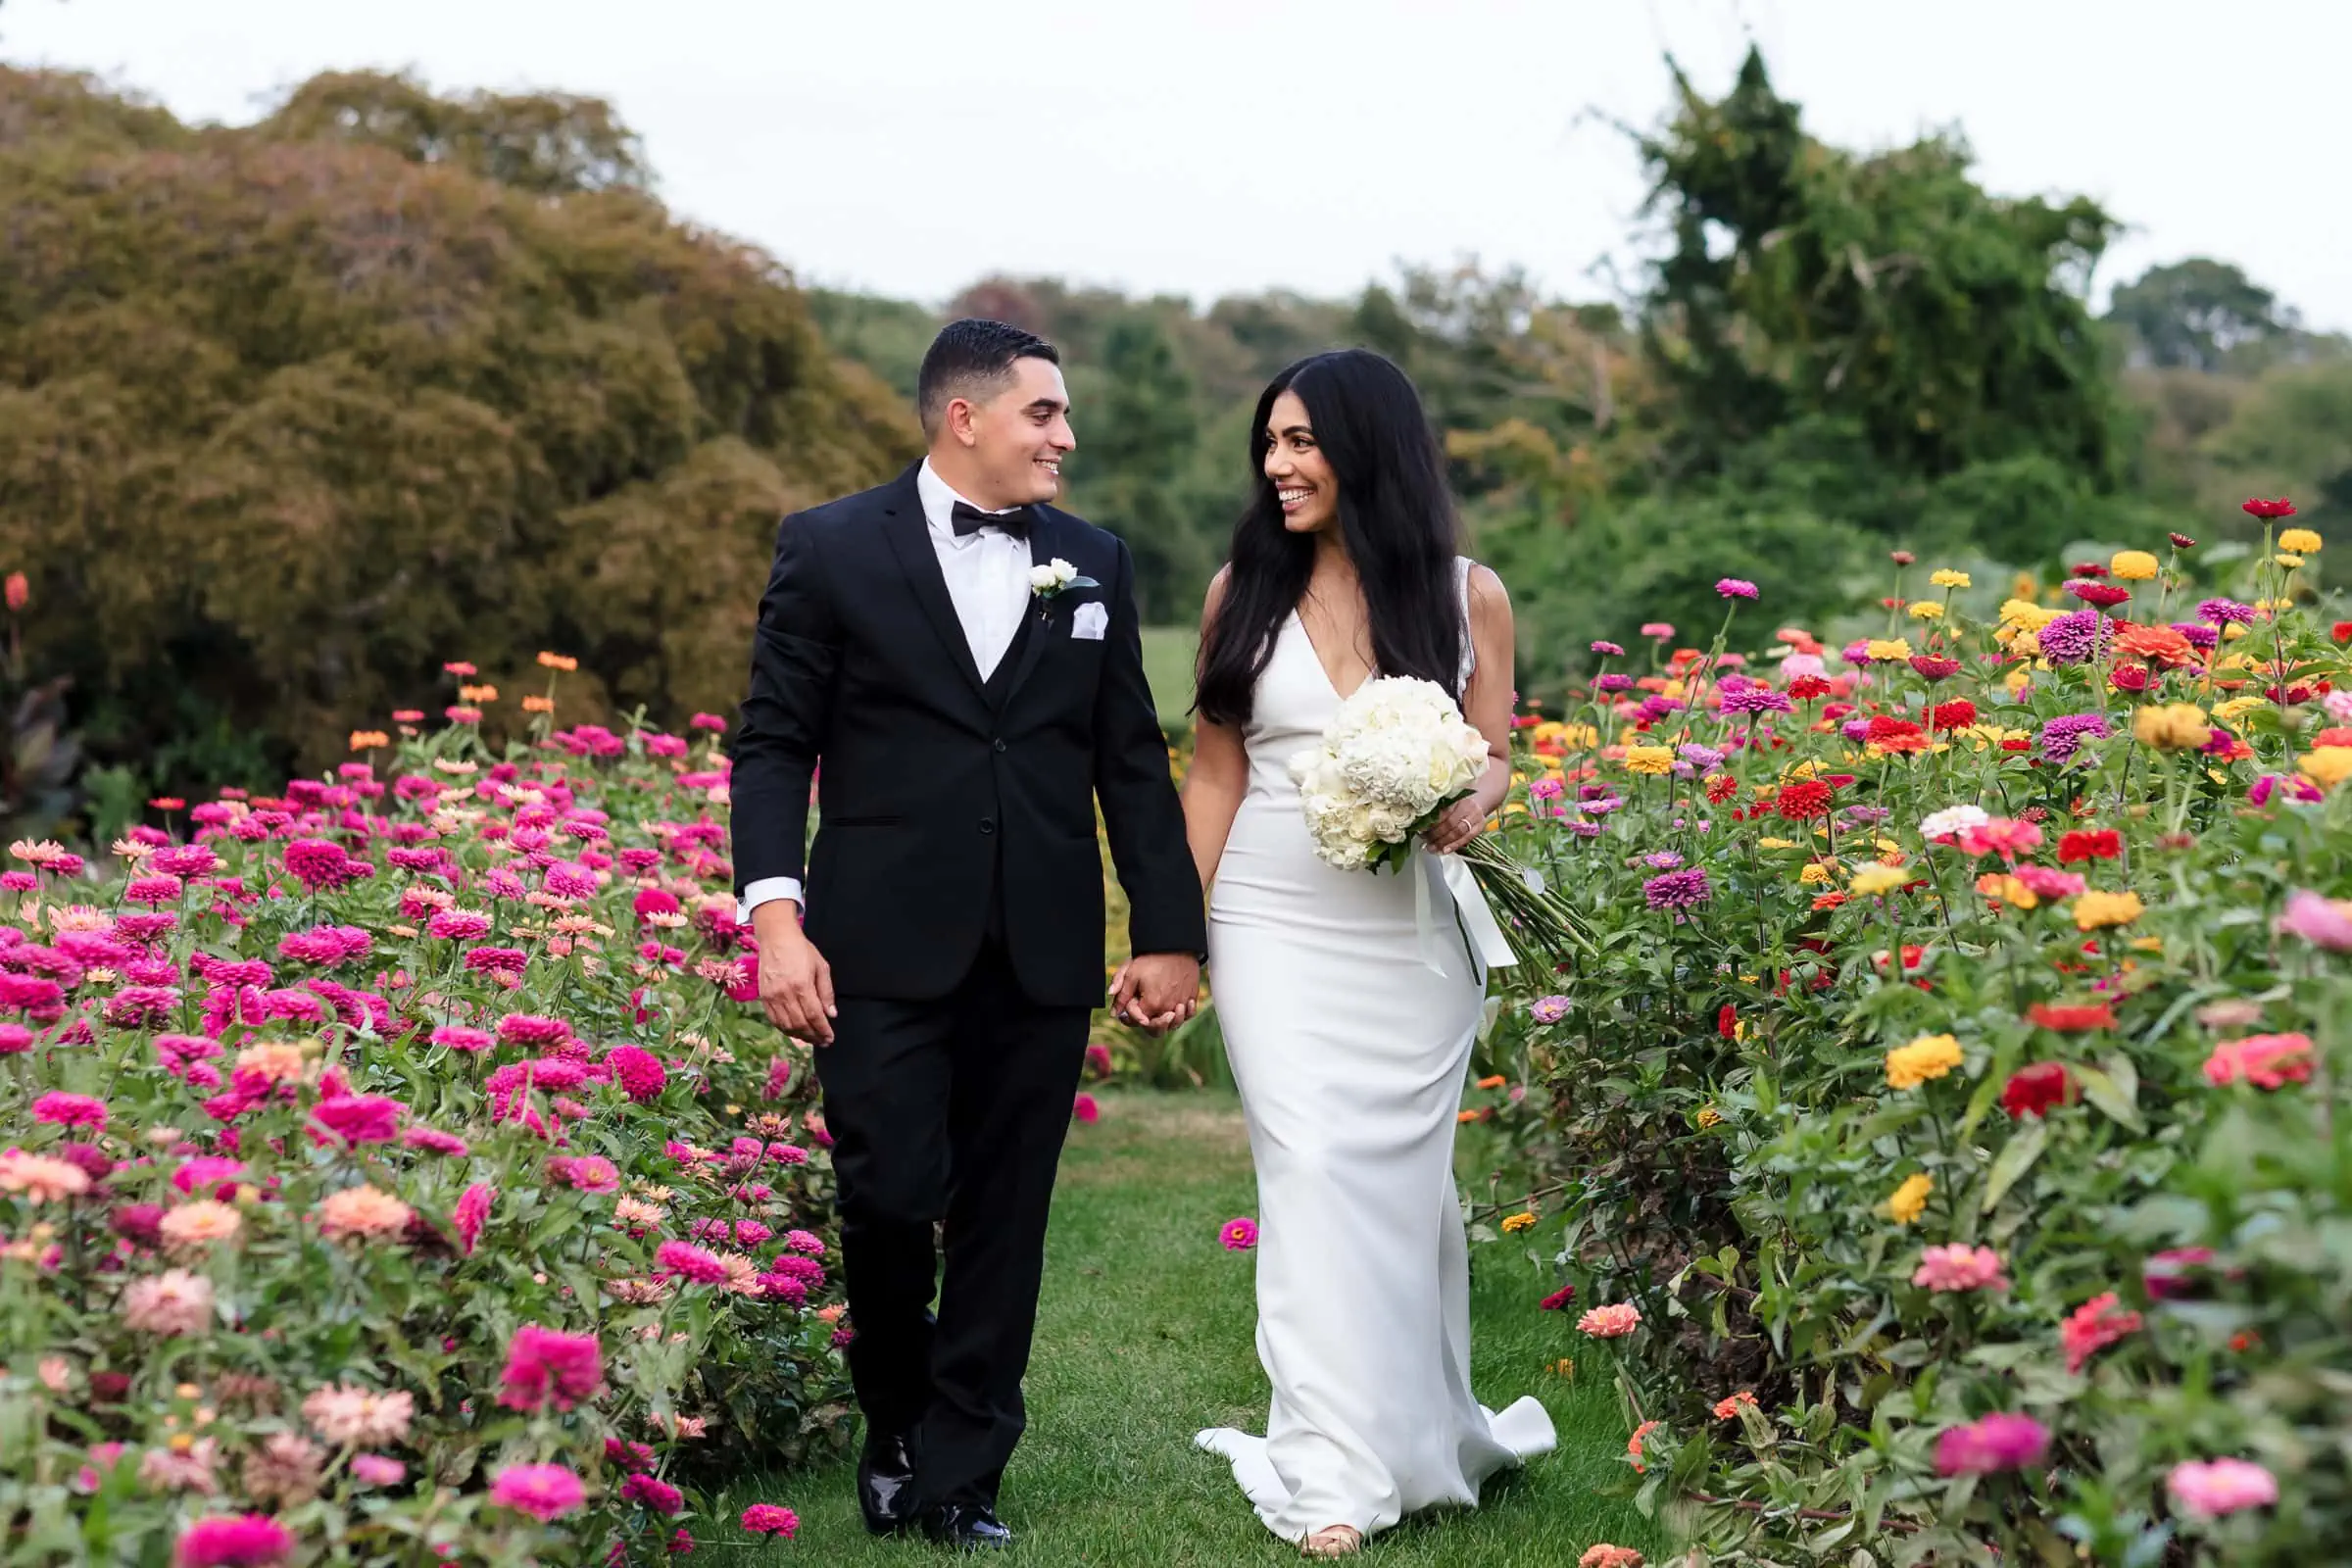 A bride in white and a groom in a black tux walk hand and hand through a garden of flowers at their harkness park wedding